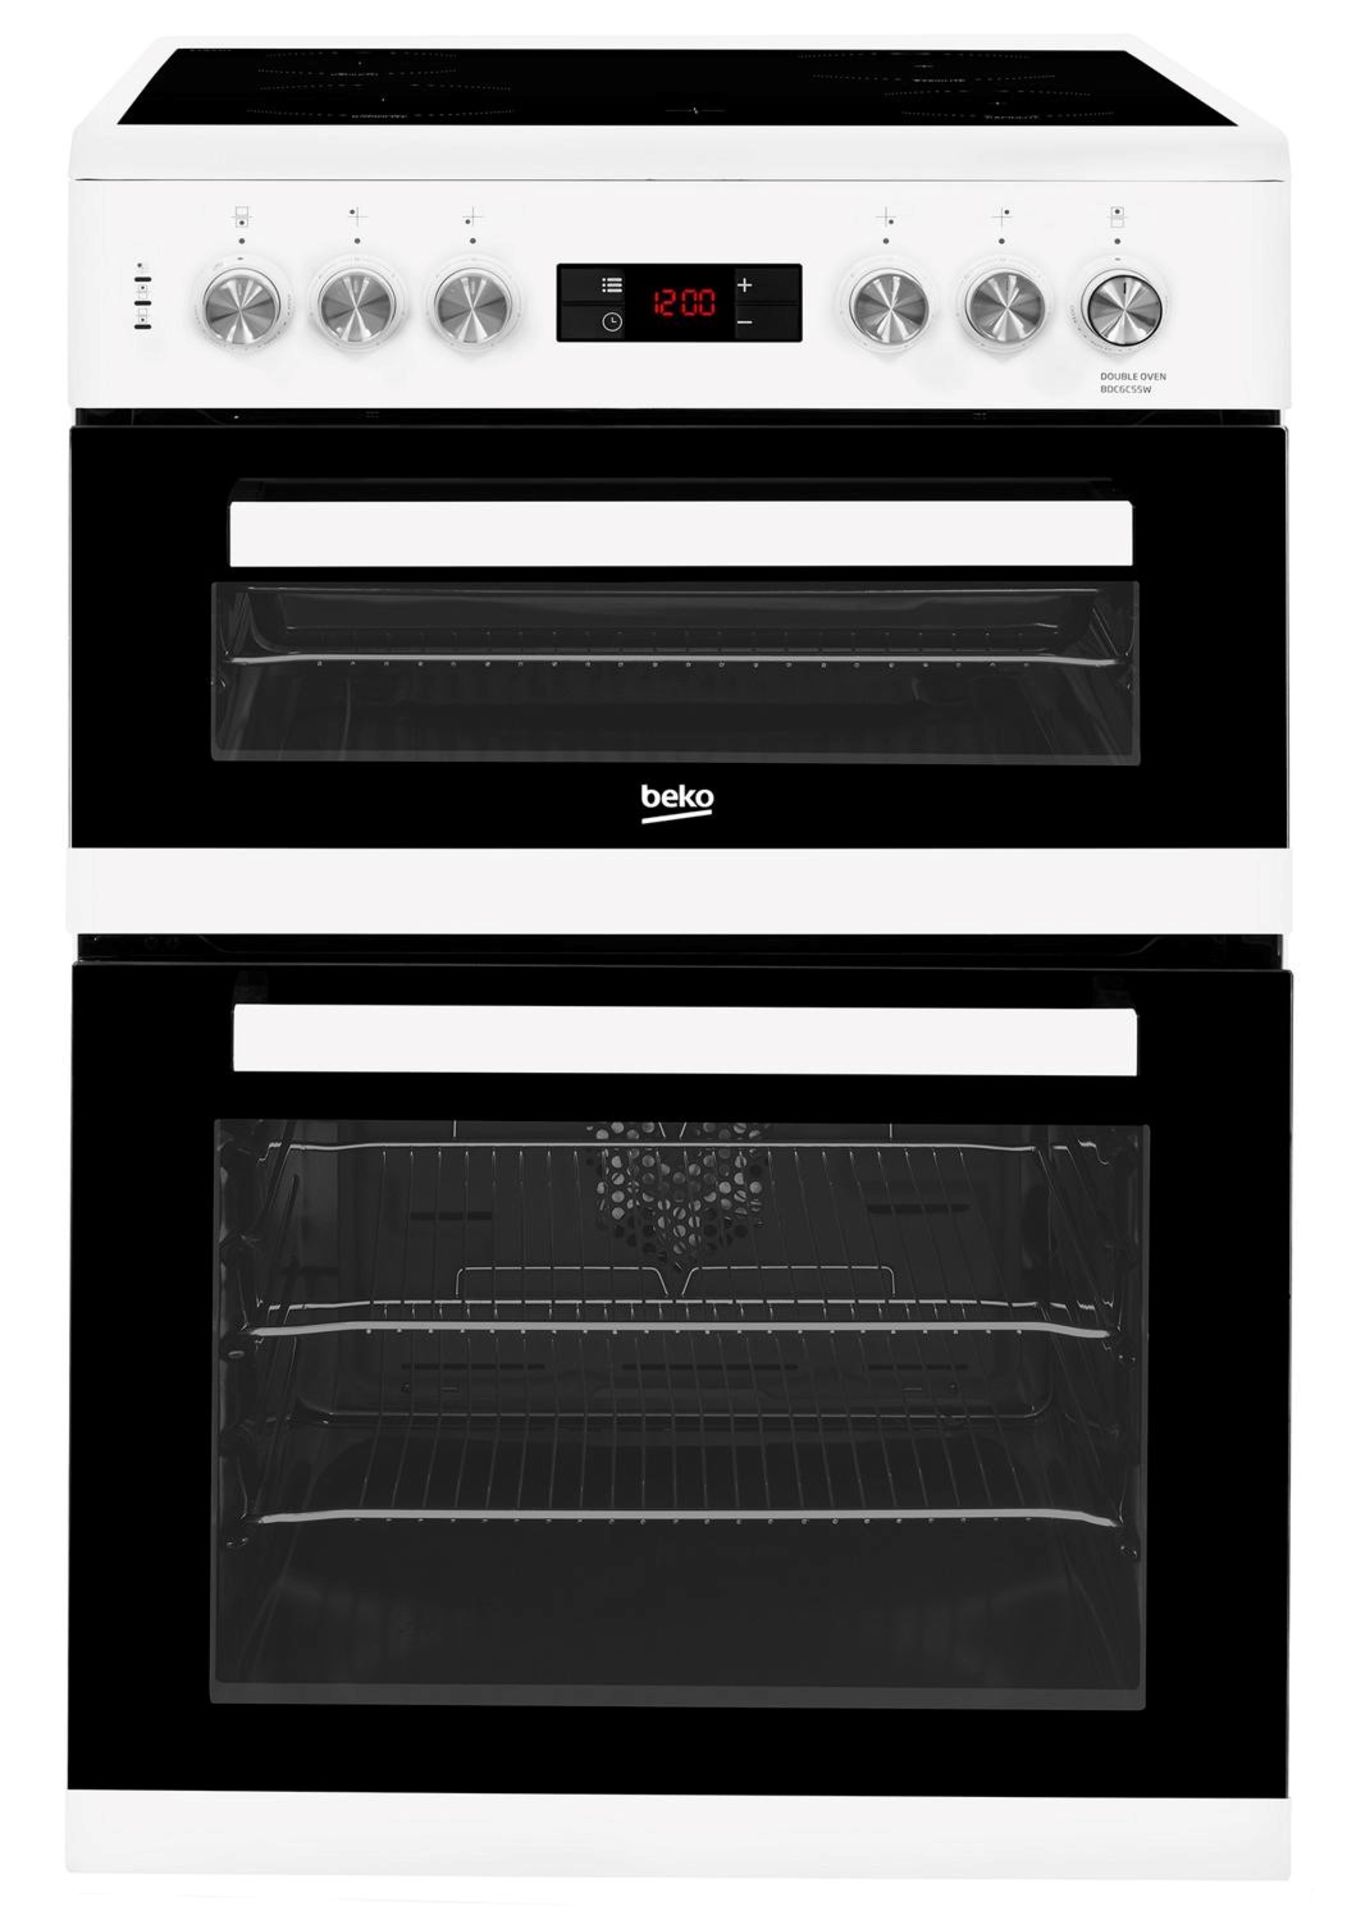 Five boxed unused Beko freestanding 60cm double oven electric cookers, white, manufacturers model